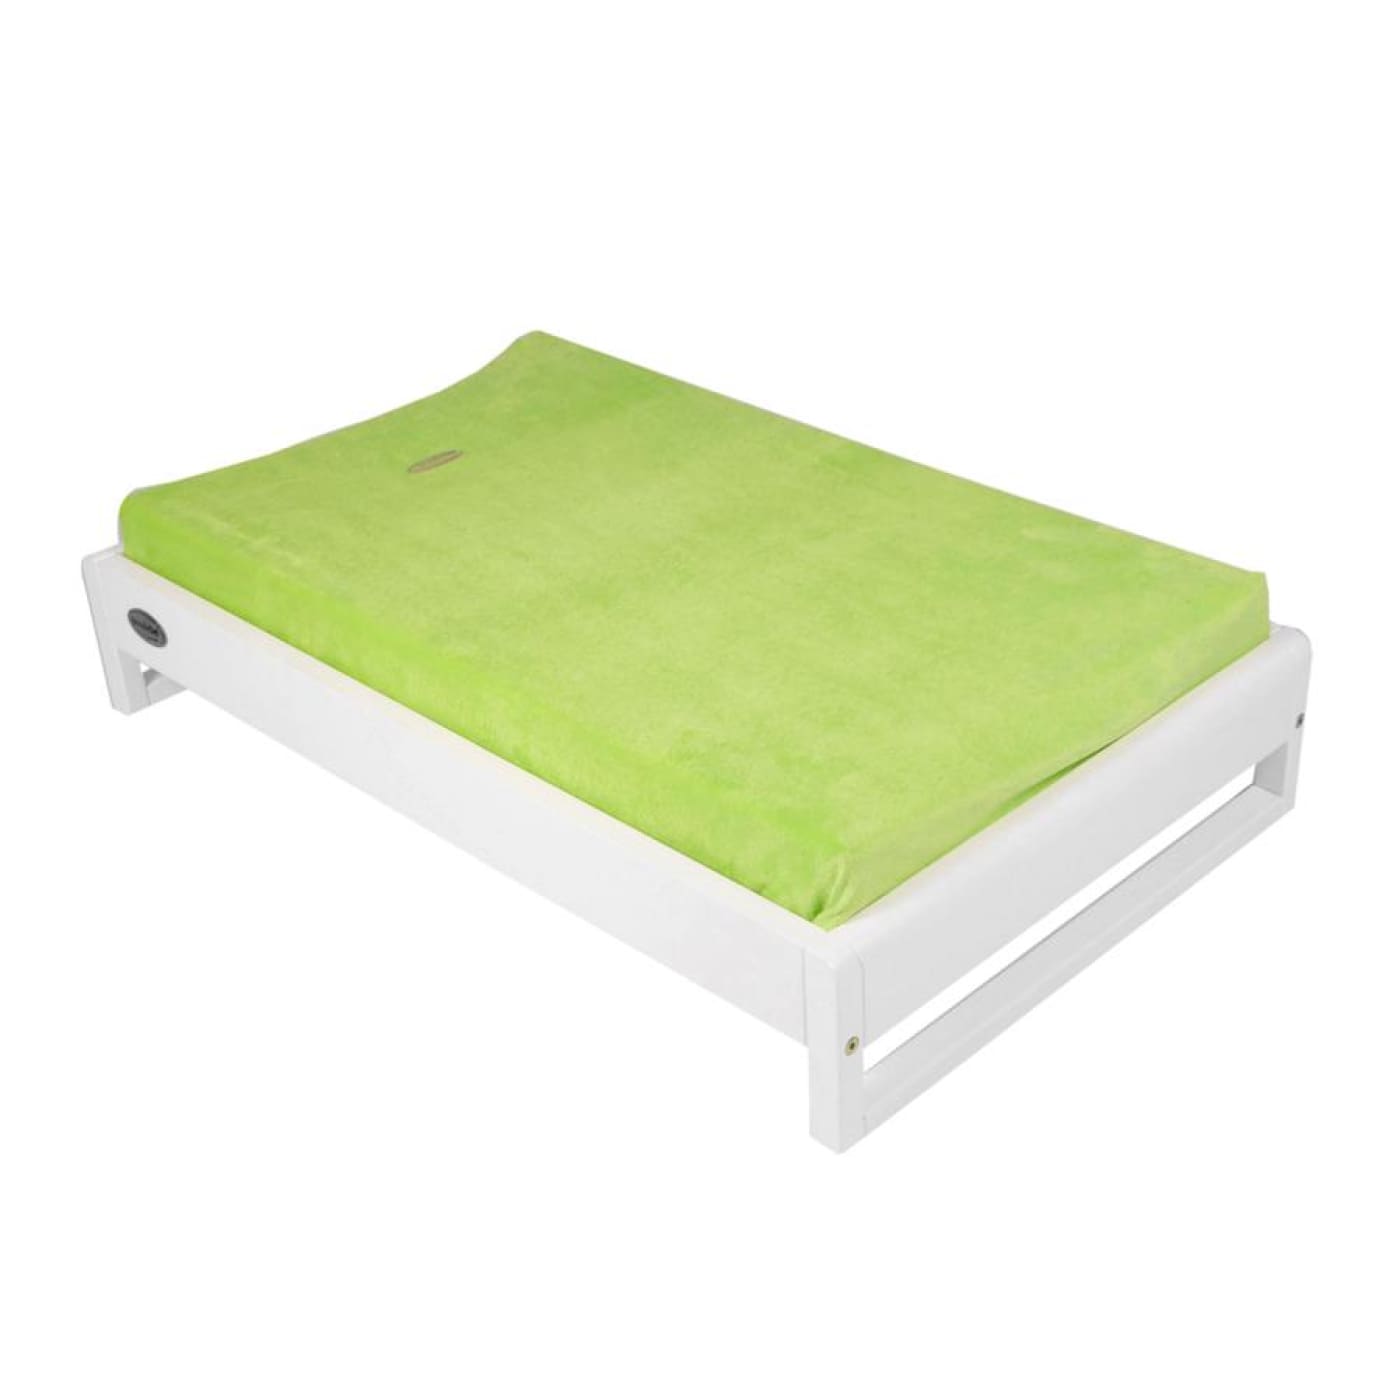 Babyhood Changemat Cover - Lime - BATHTIME & CHANGING - CHANGE MATS/COVERS